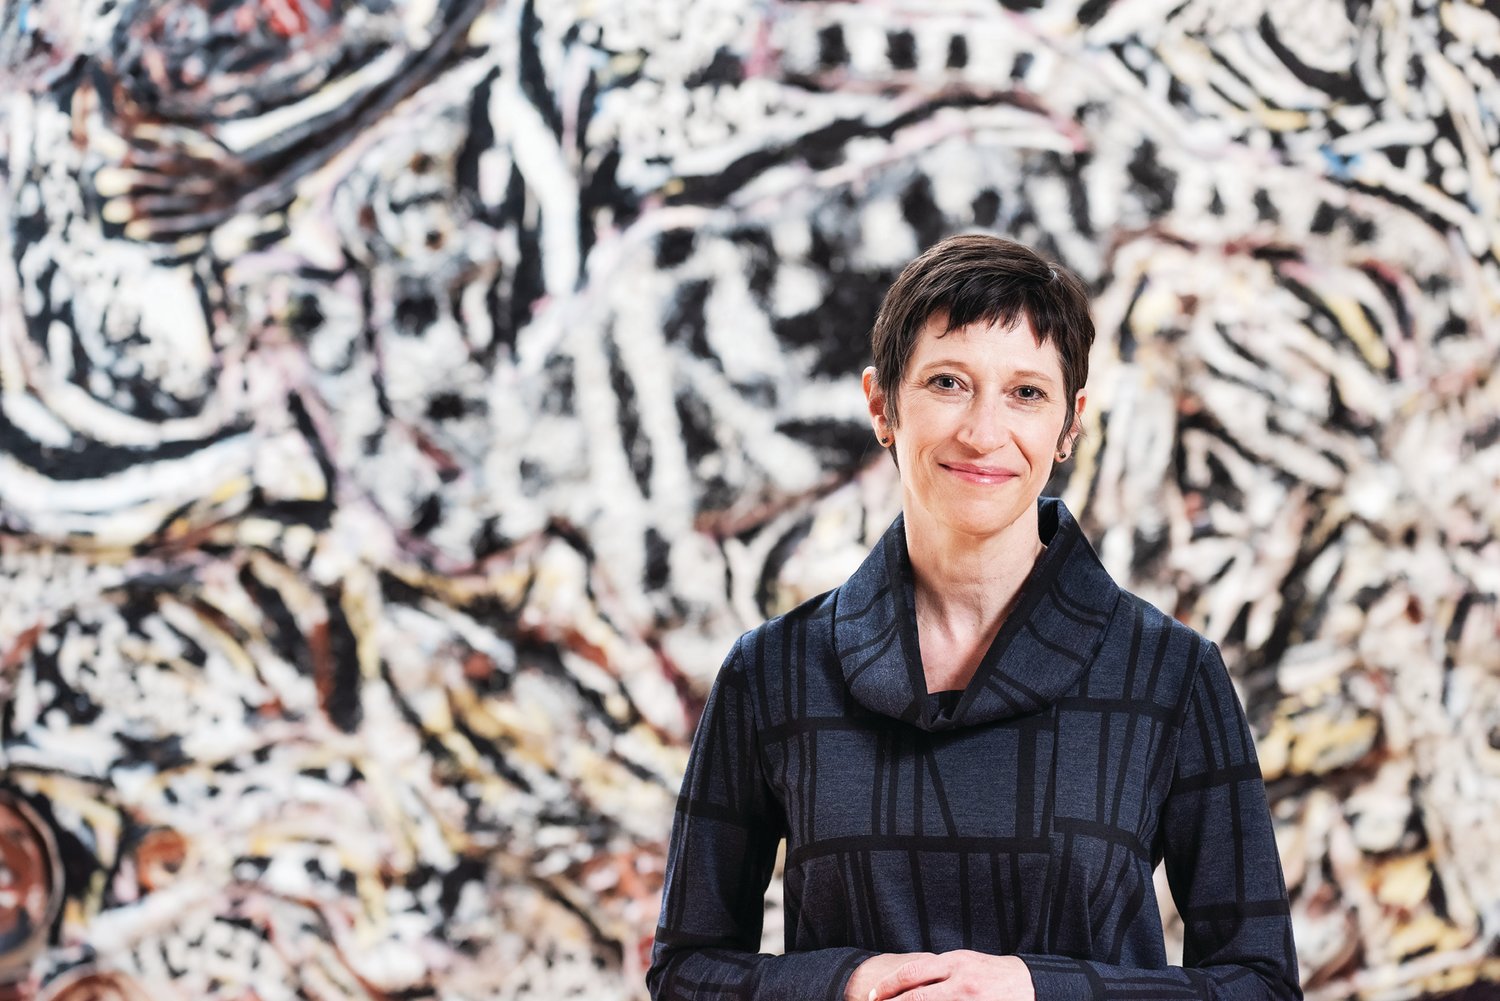 Jessica Todd Smith, director of curatorial initiatives and the Susan Gray Detweiler curator of American art at the Philadelphia Museum of Art, will serve as juror for the 11th annual AOY Art Center Juried Art Show.